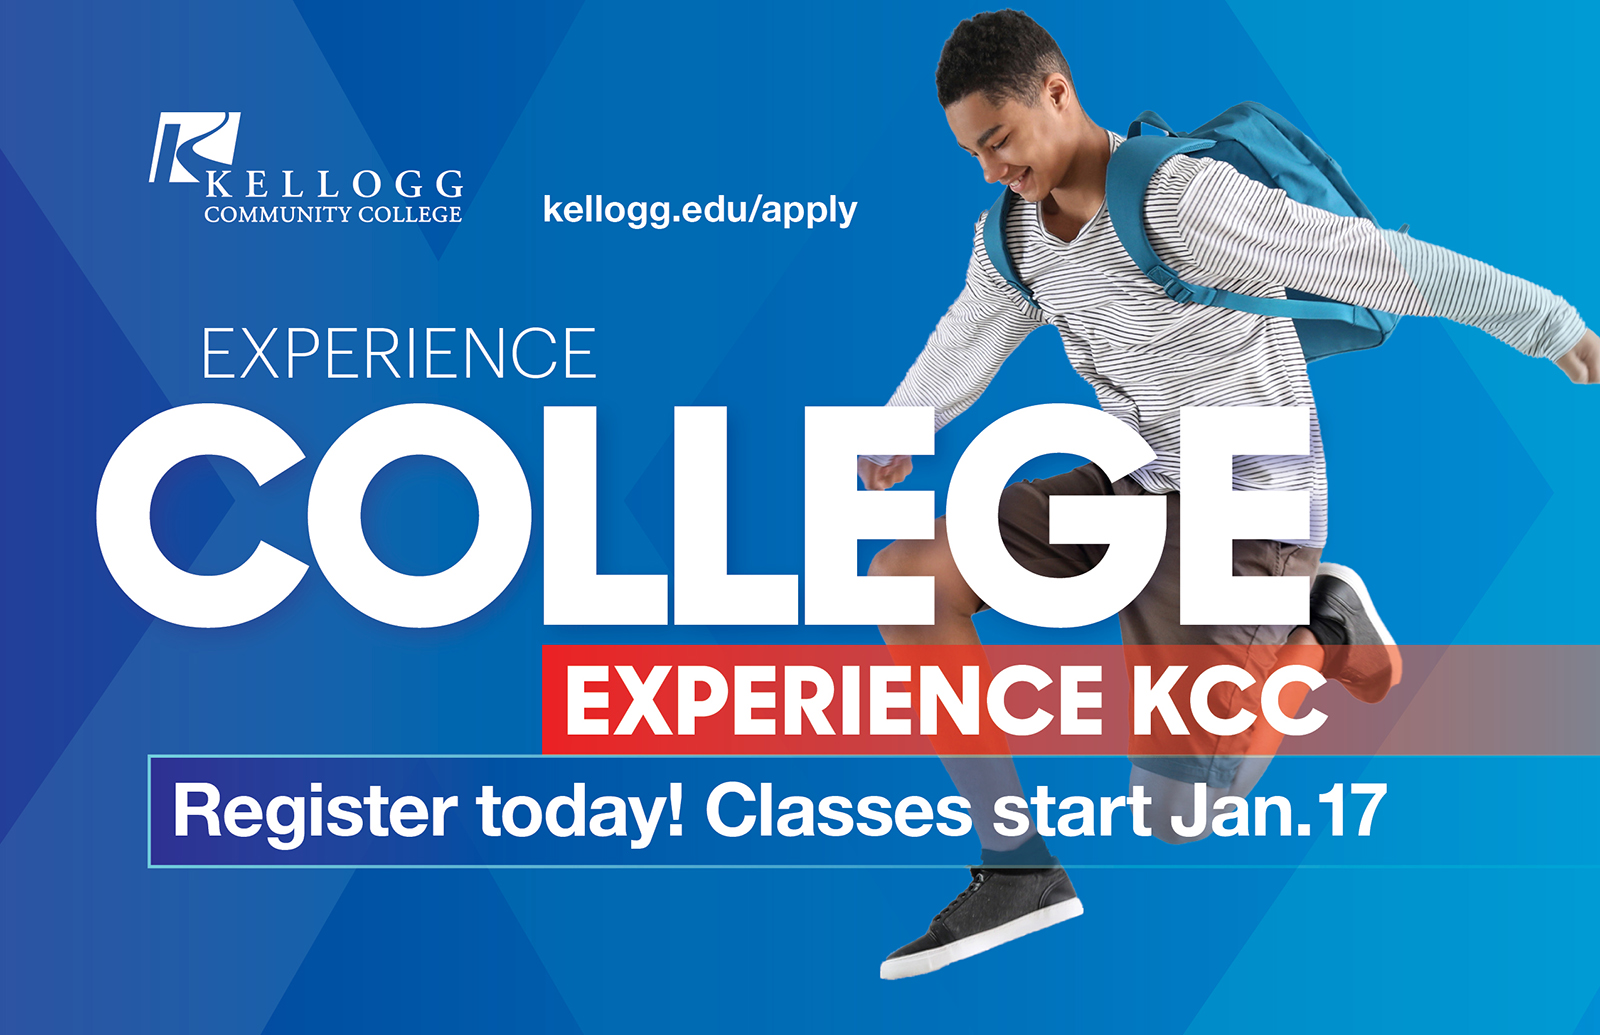 A student in a backpack jumps on a text slide that reads, "Experience College. Experience KCC. Register today! Classes start Jan. 17."